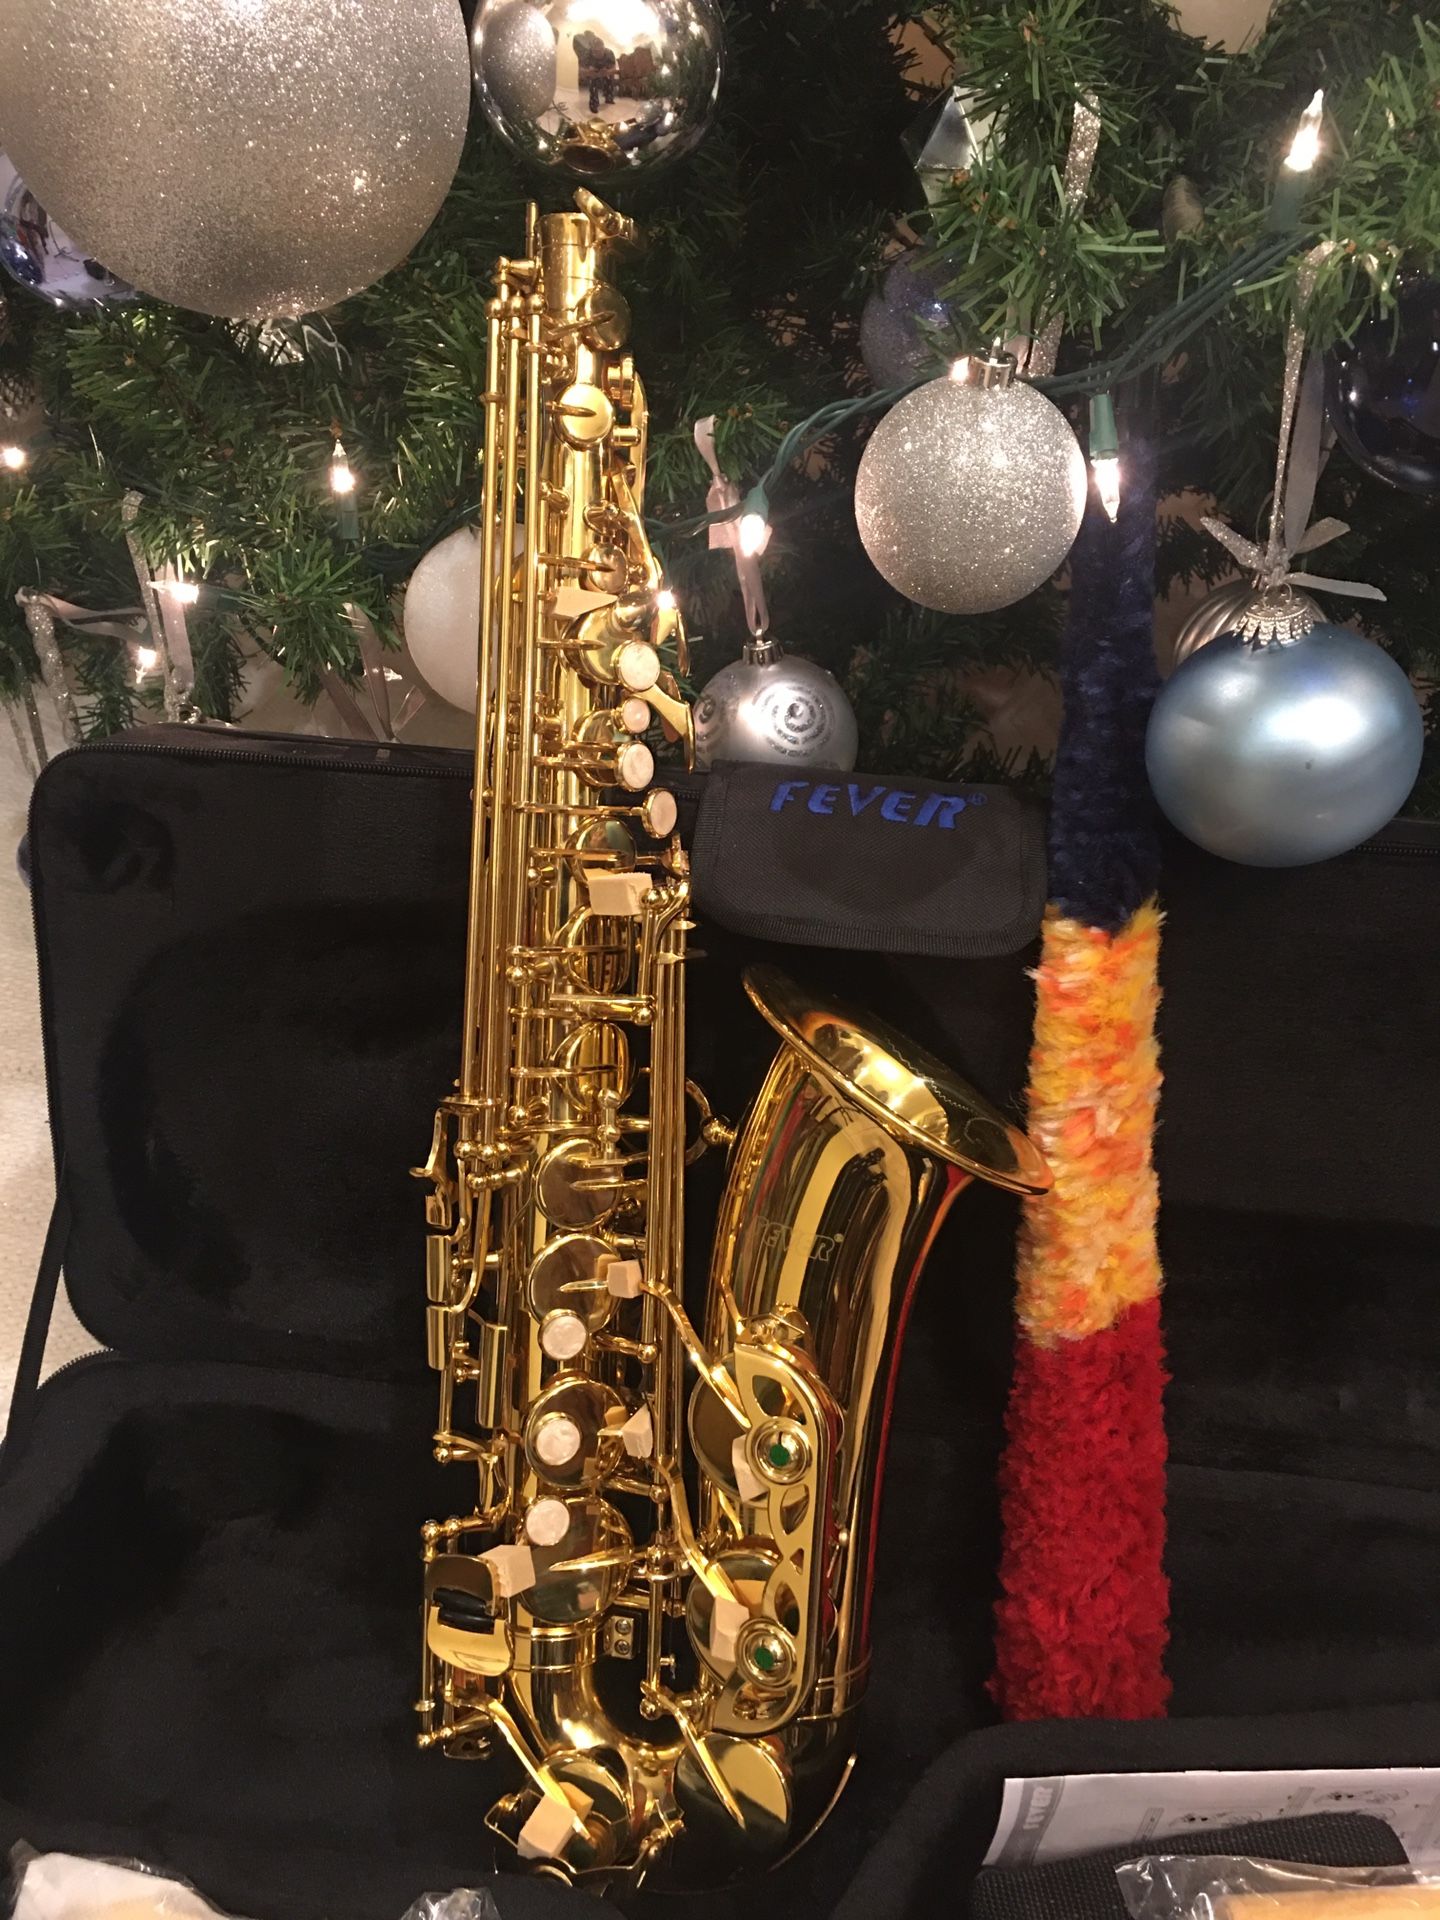 Fever alto saxophone with case neck strap mouthpiece cleaning cloth and gloves